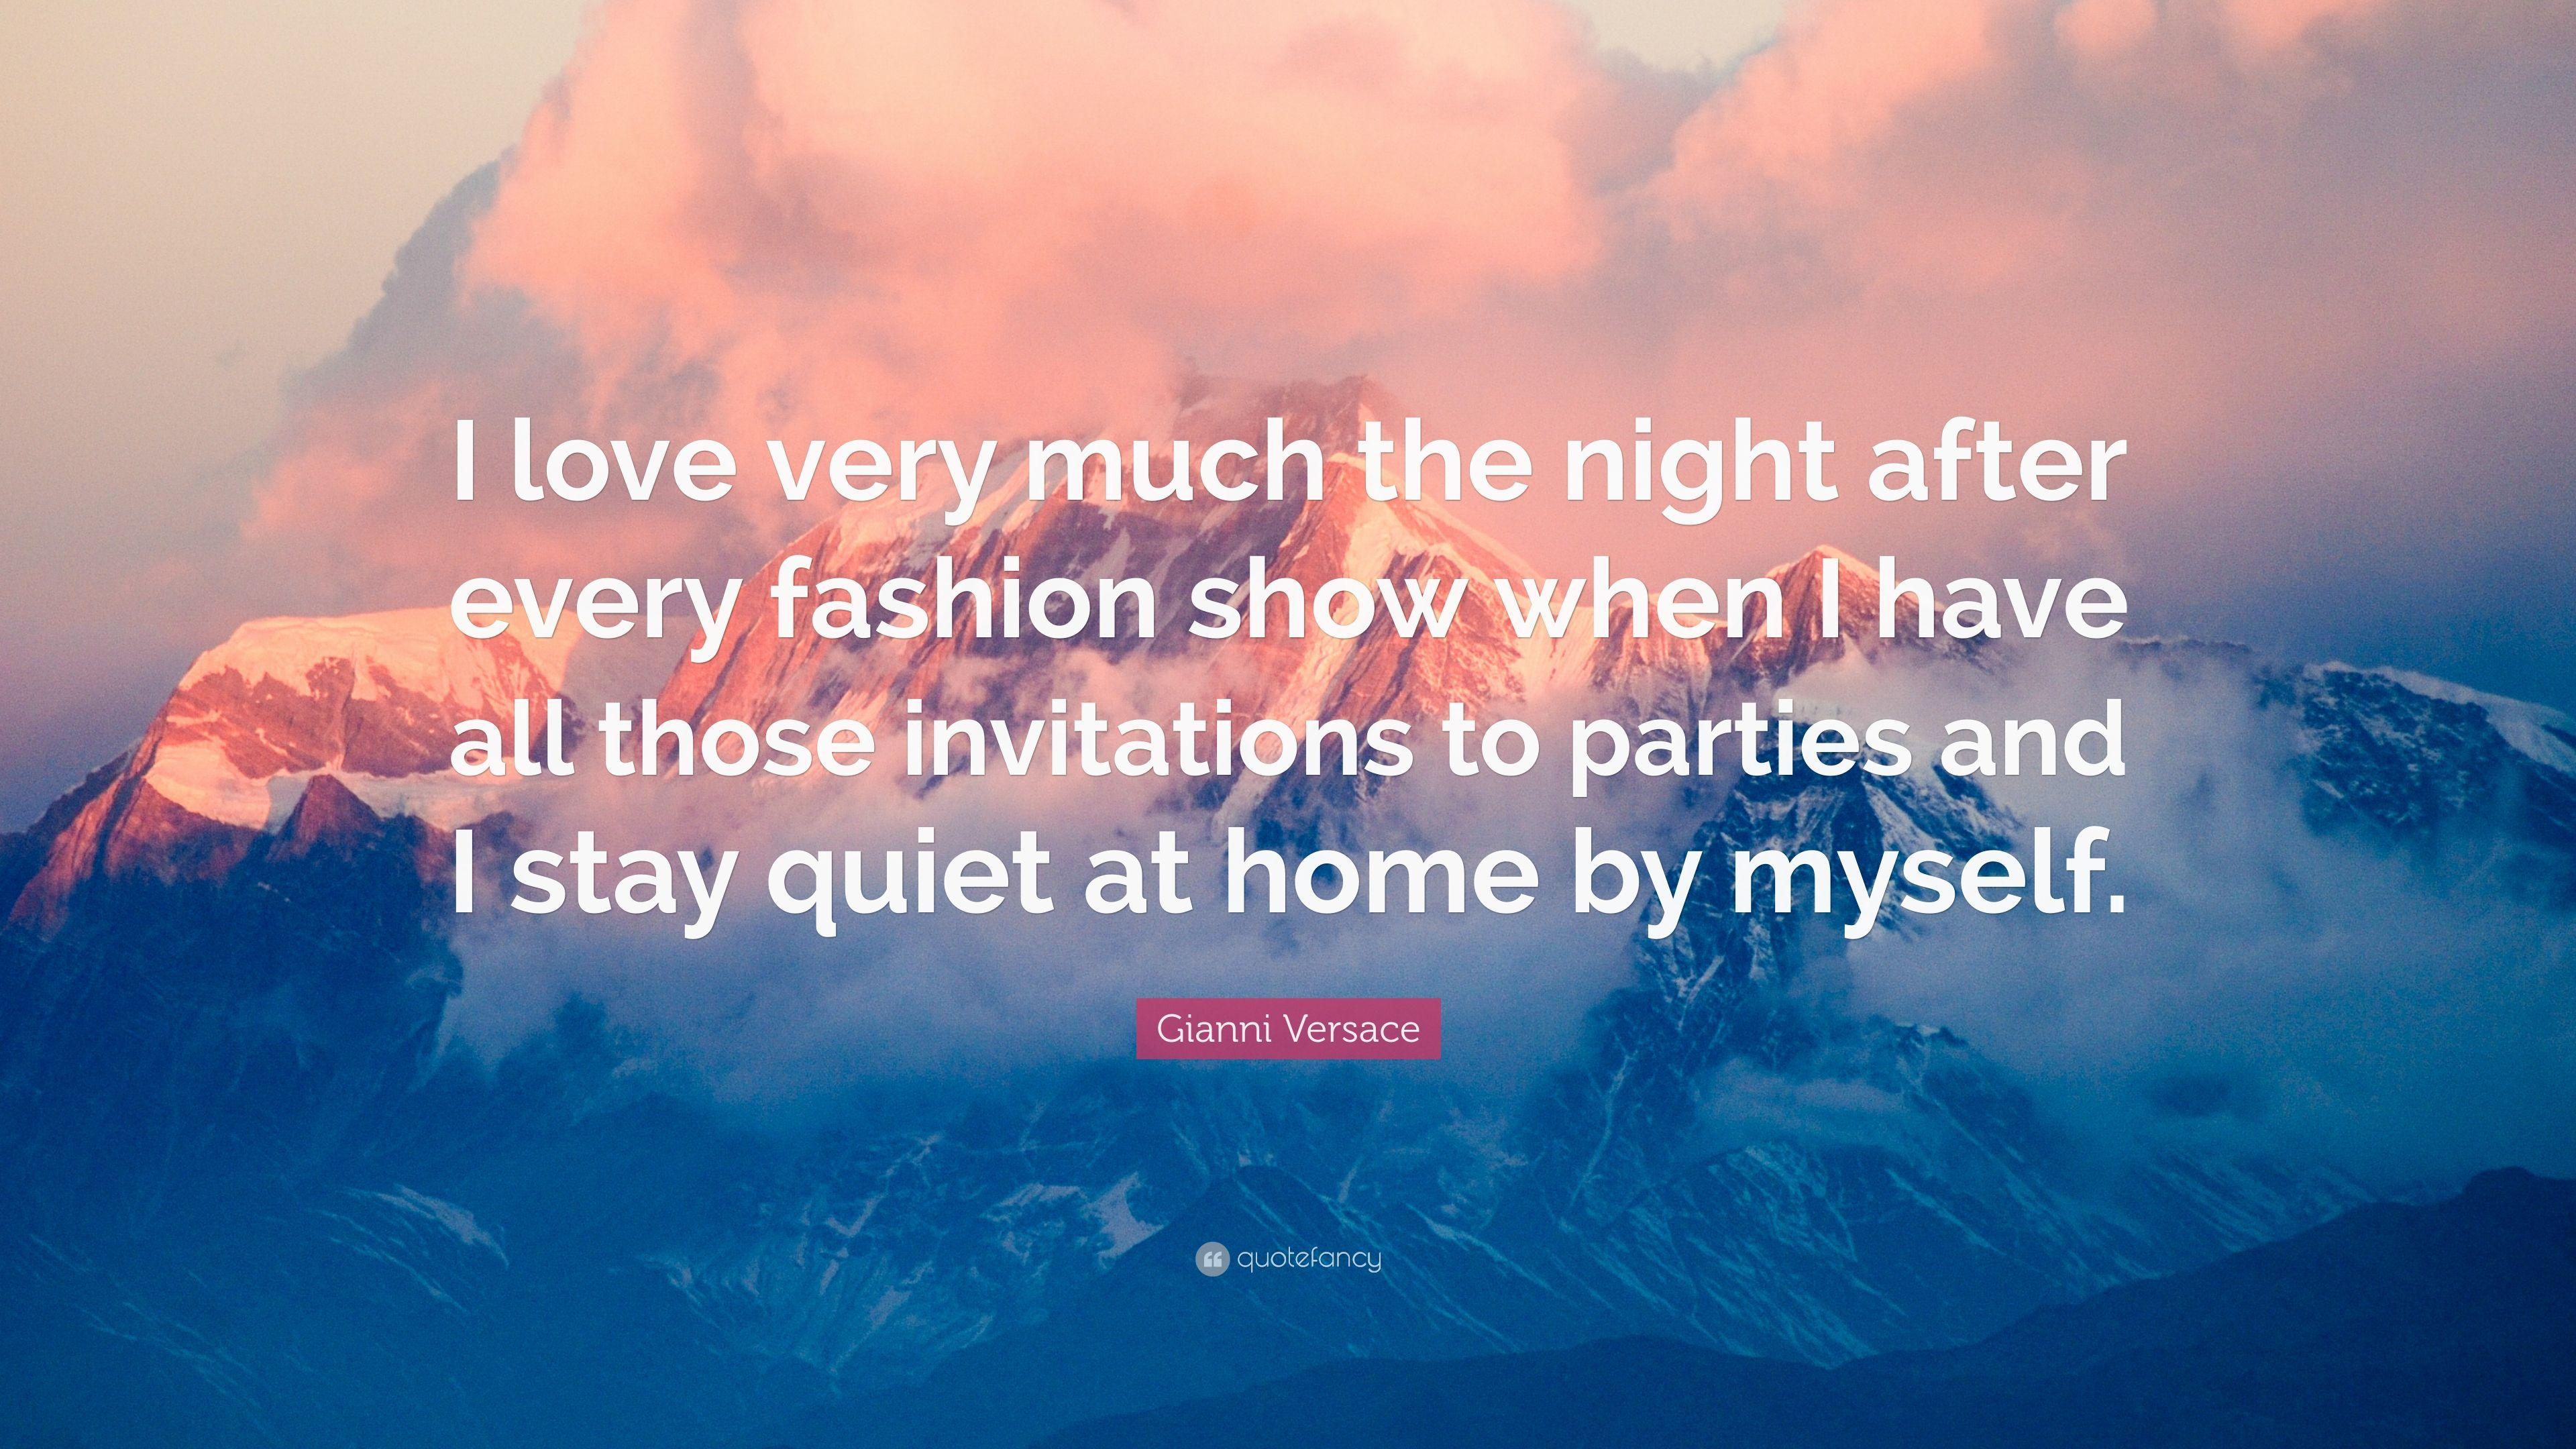 Gianni Versace Quote: “I love very much the night after every